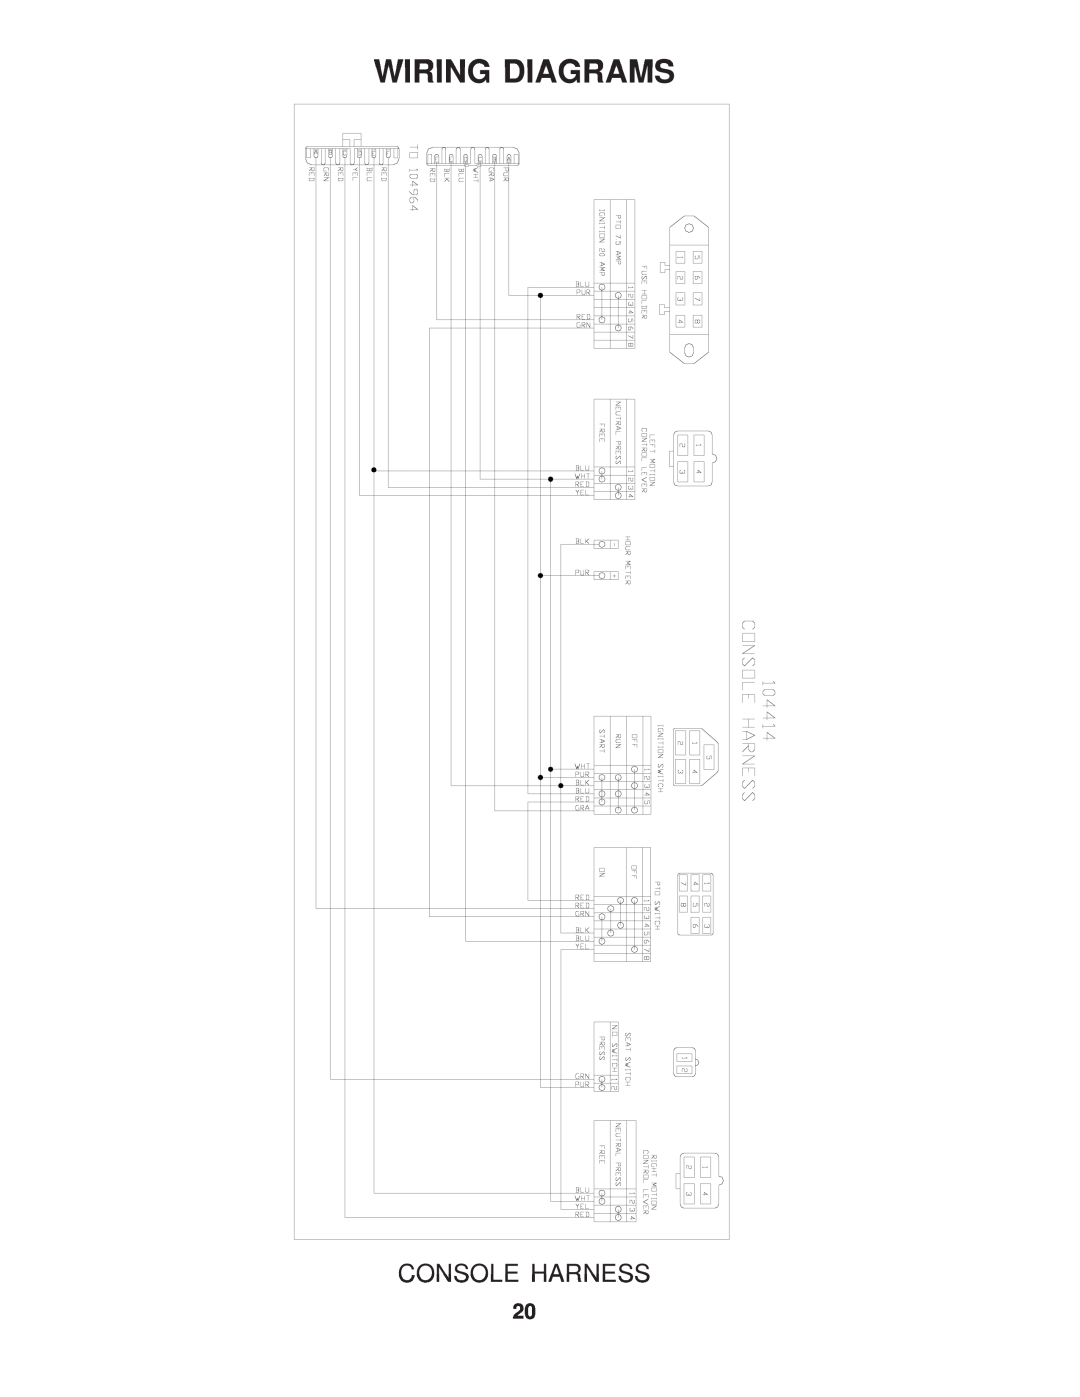 Yazoo/Kees ZVKE61261, ZVKW61251, ZVKW61231, ZVKW52251, ZVKW52231, ZVKHL61231, ZVKH61251 manual Wiring Diagrams, Console Harness 